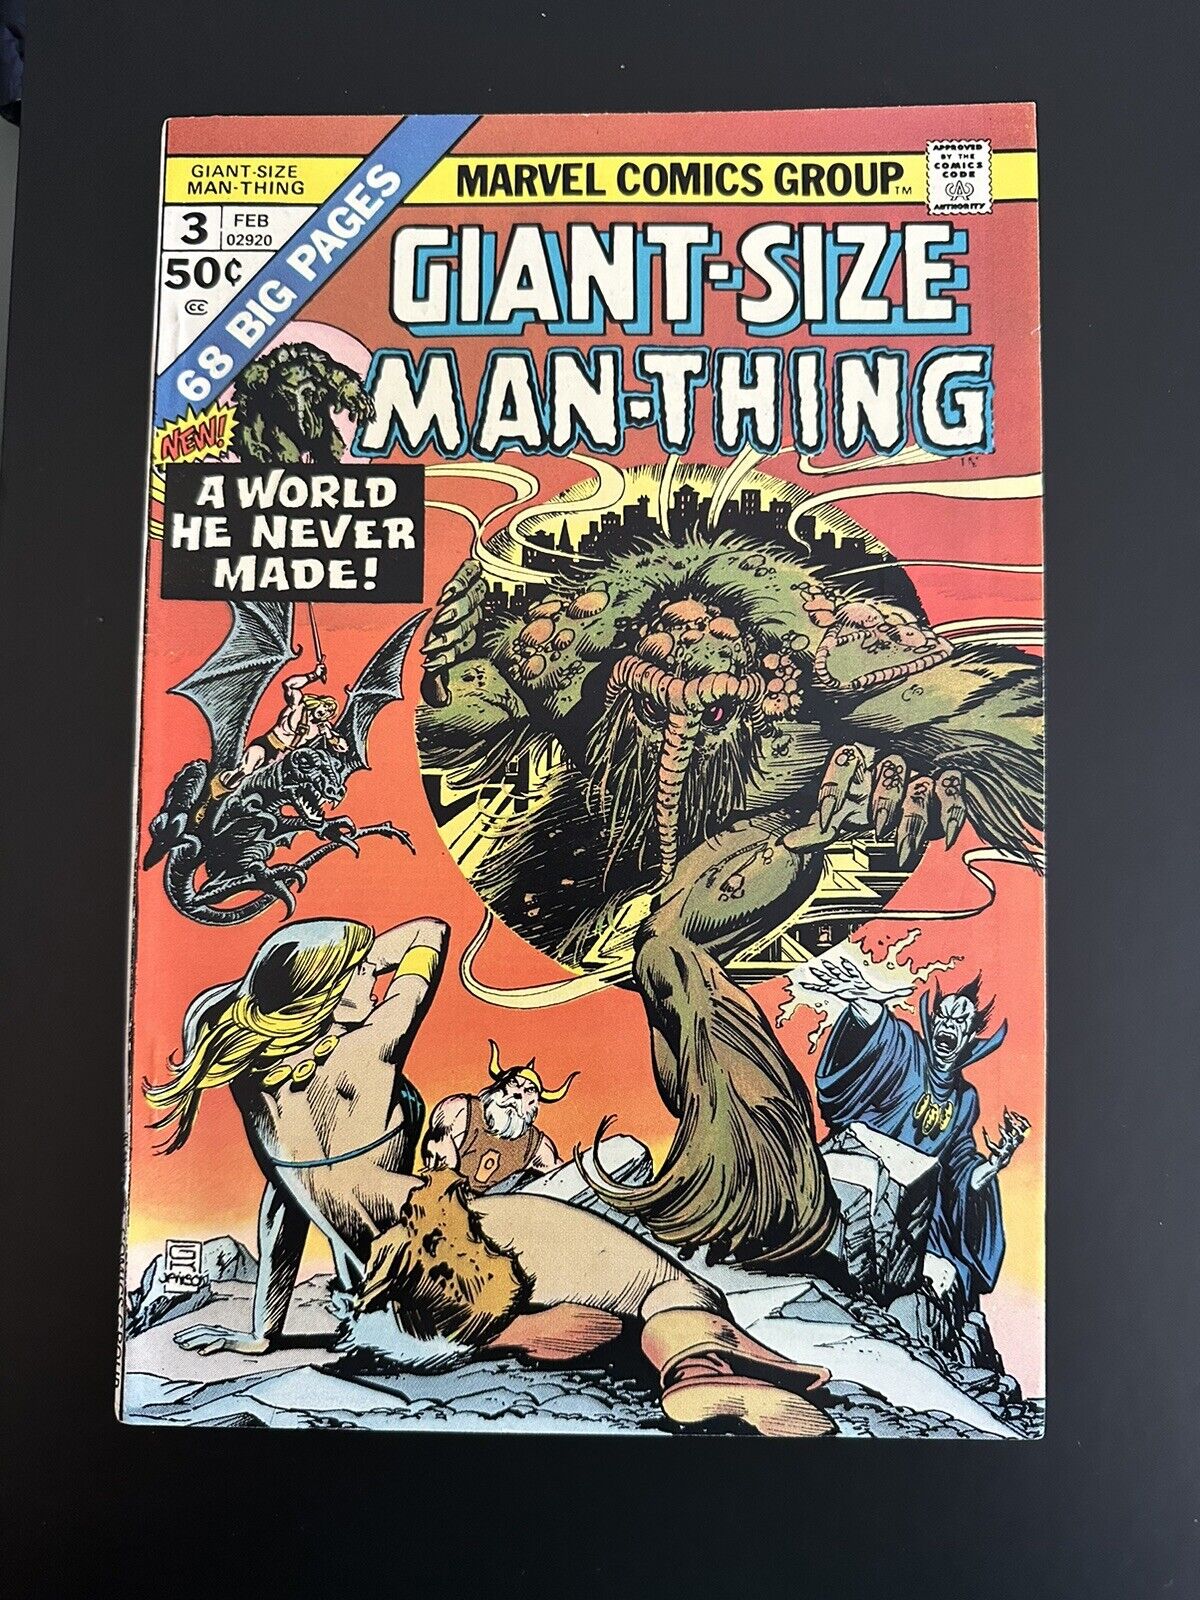 Giant-Size Man-Thing #3 (1974) VG/FN 5.0